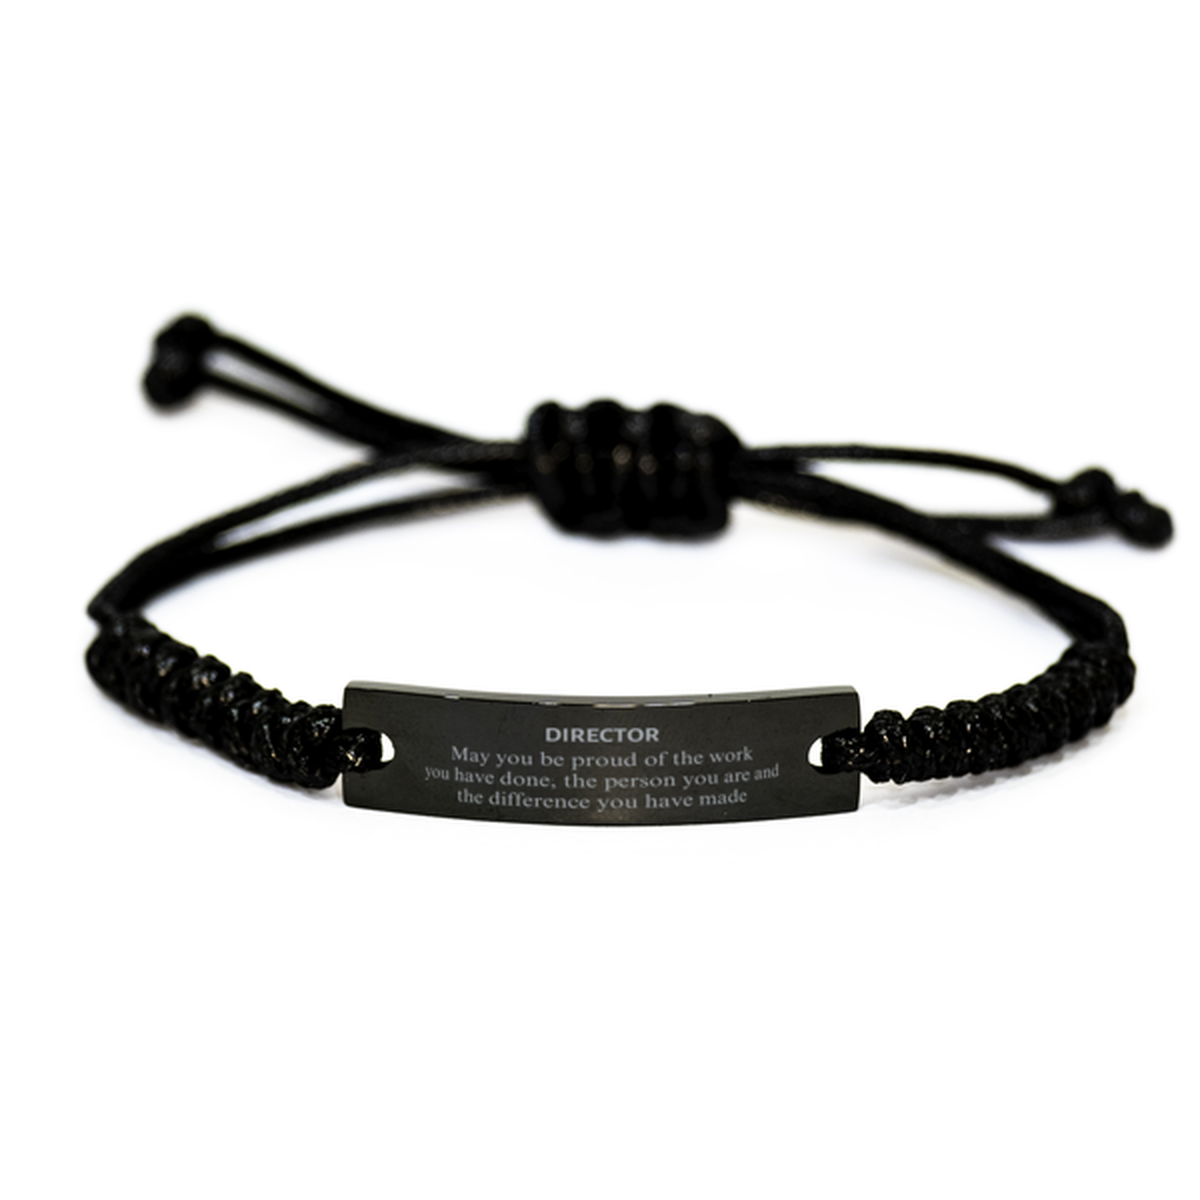 Director May you be proud of the work you have done, Retirement Director Black Rope Bracelet for Colleague Appreciation Gifts Amazing for Director